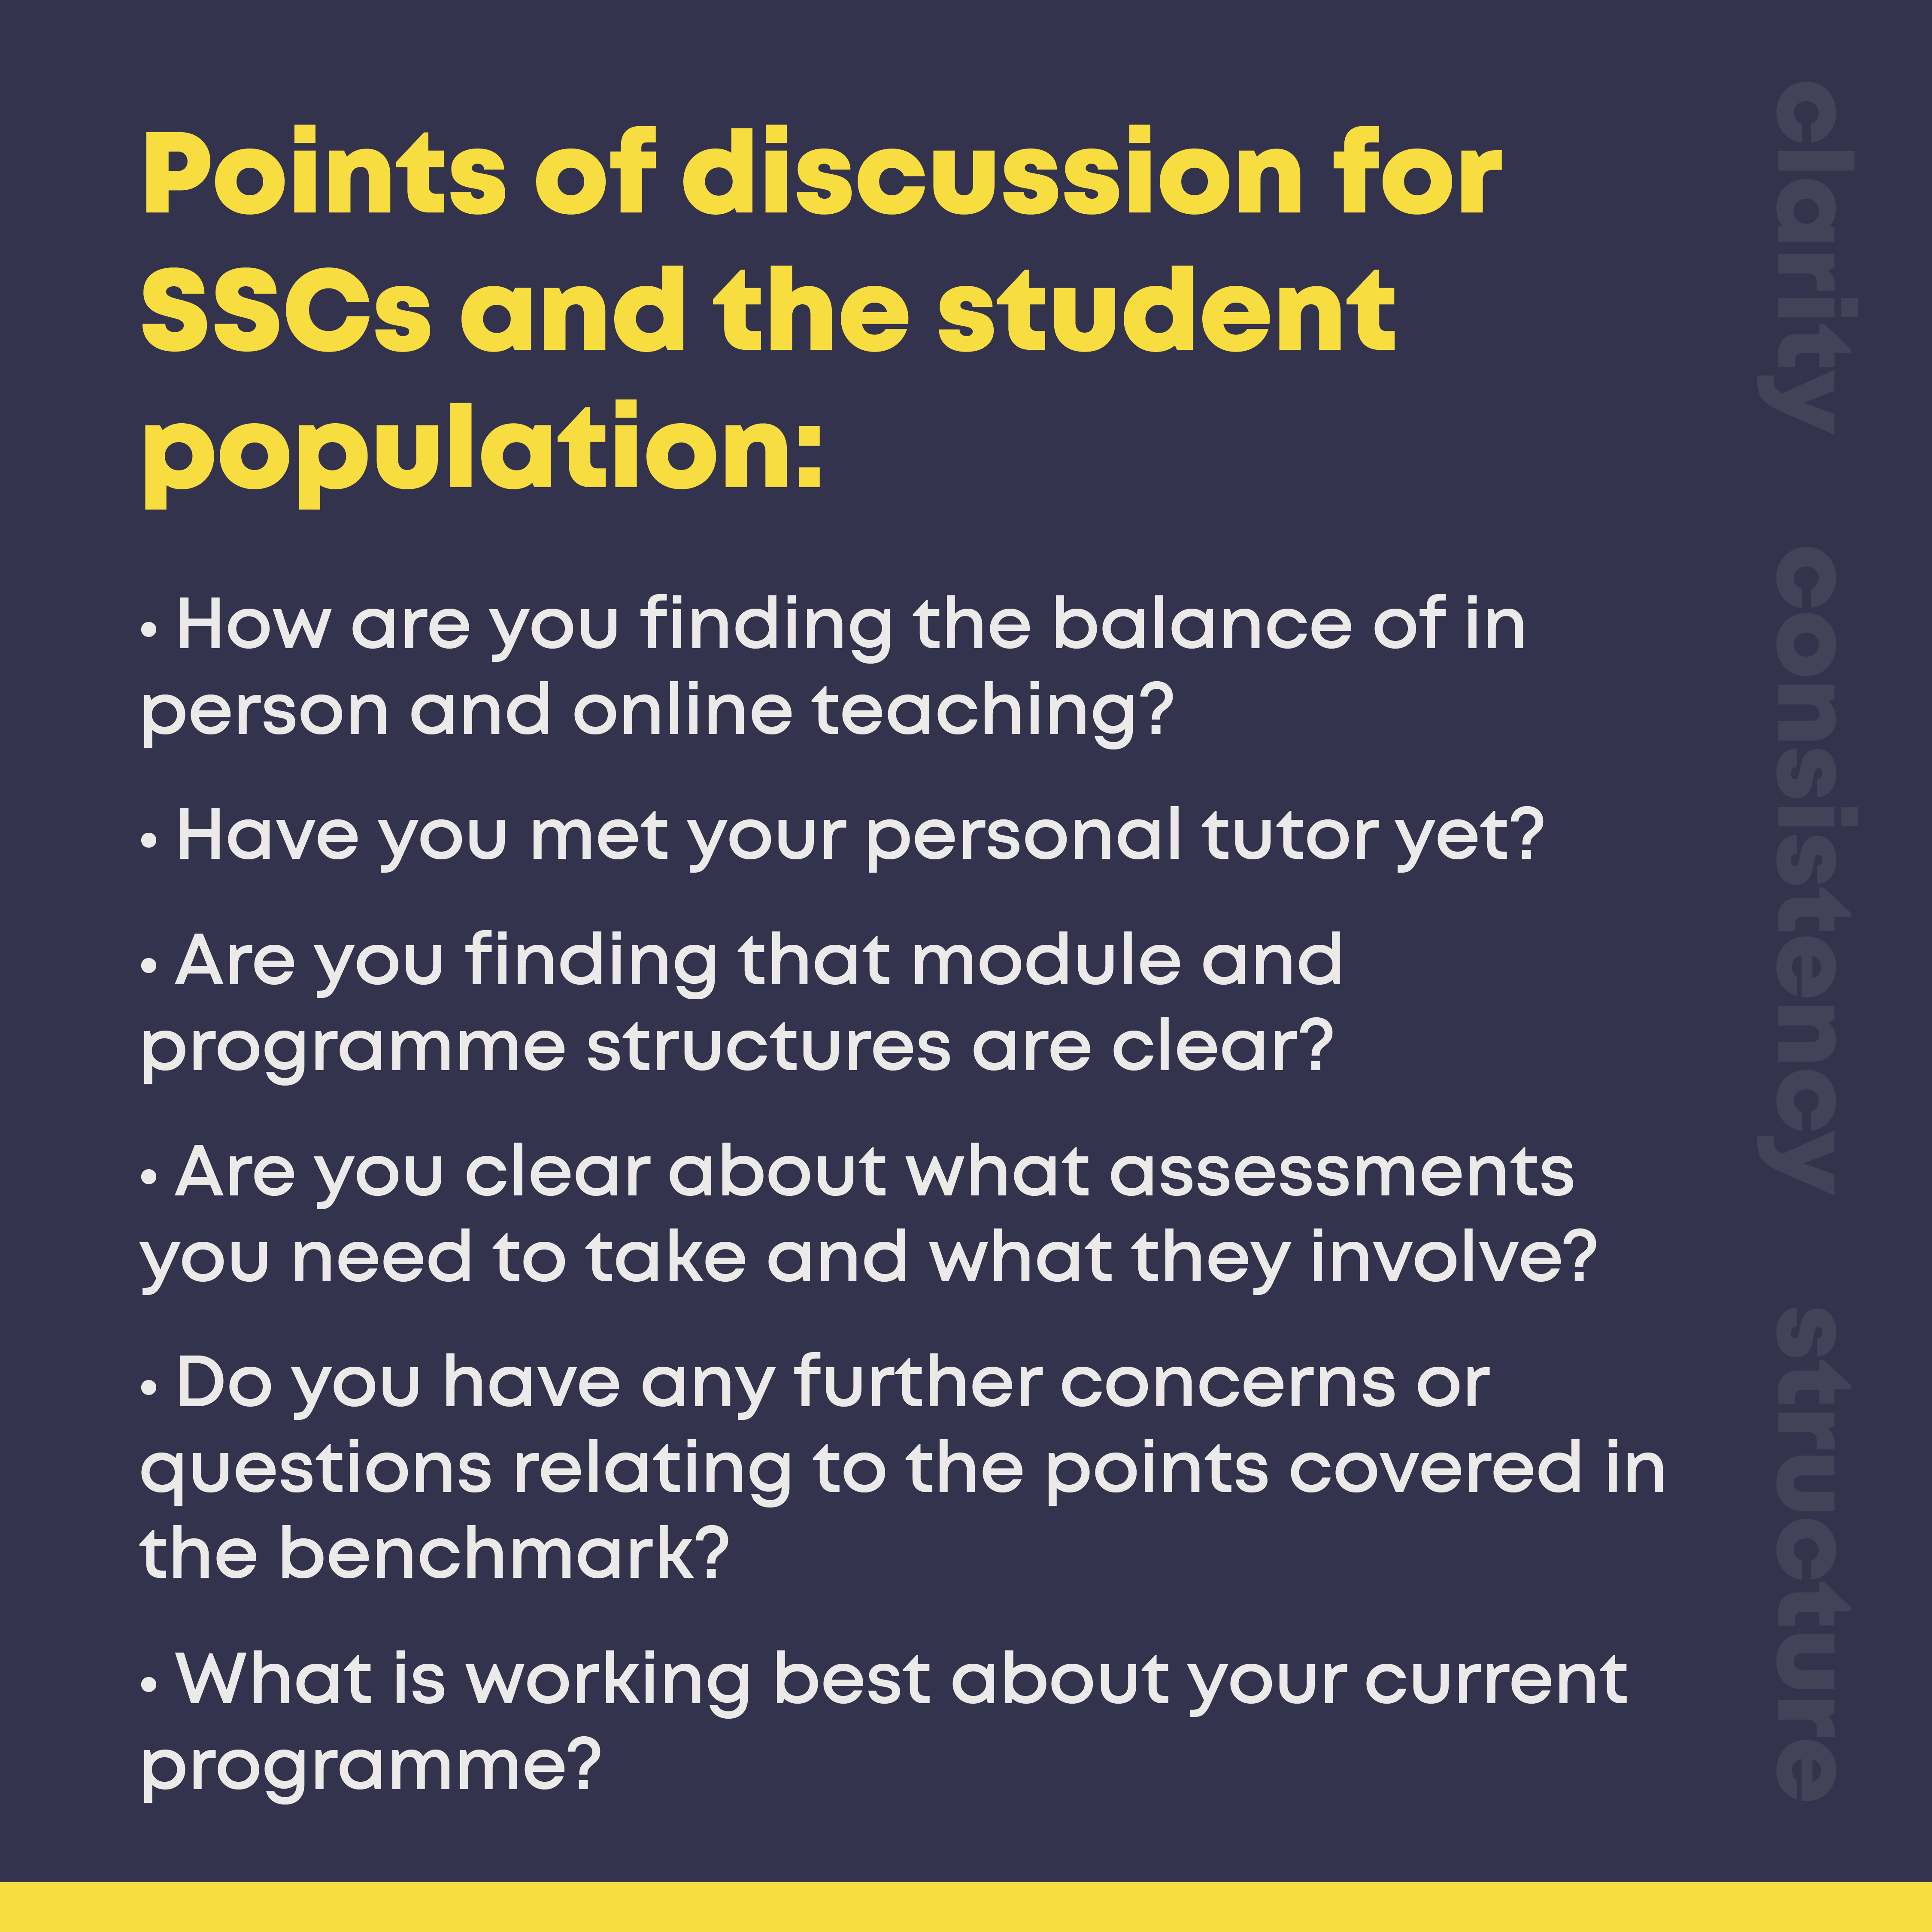 Points of discussion for SSCs and the student population:  • How are you finding the balance of in person and online teaching?  • Have you met your personal tutor yet?  • Are you finding that module and programme structures are clear? • Are you clear about what assessments you need to take and what they involve? • Do you have any further concerns or questions relating to the points covered in the benchmark? • What is working best about your current programme?  